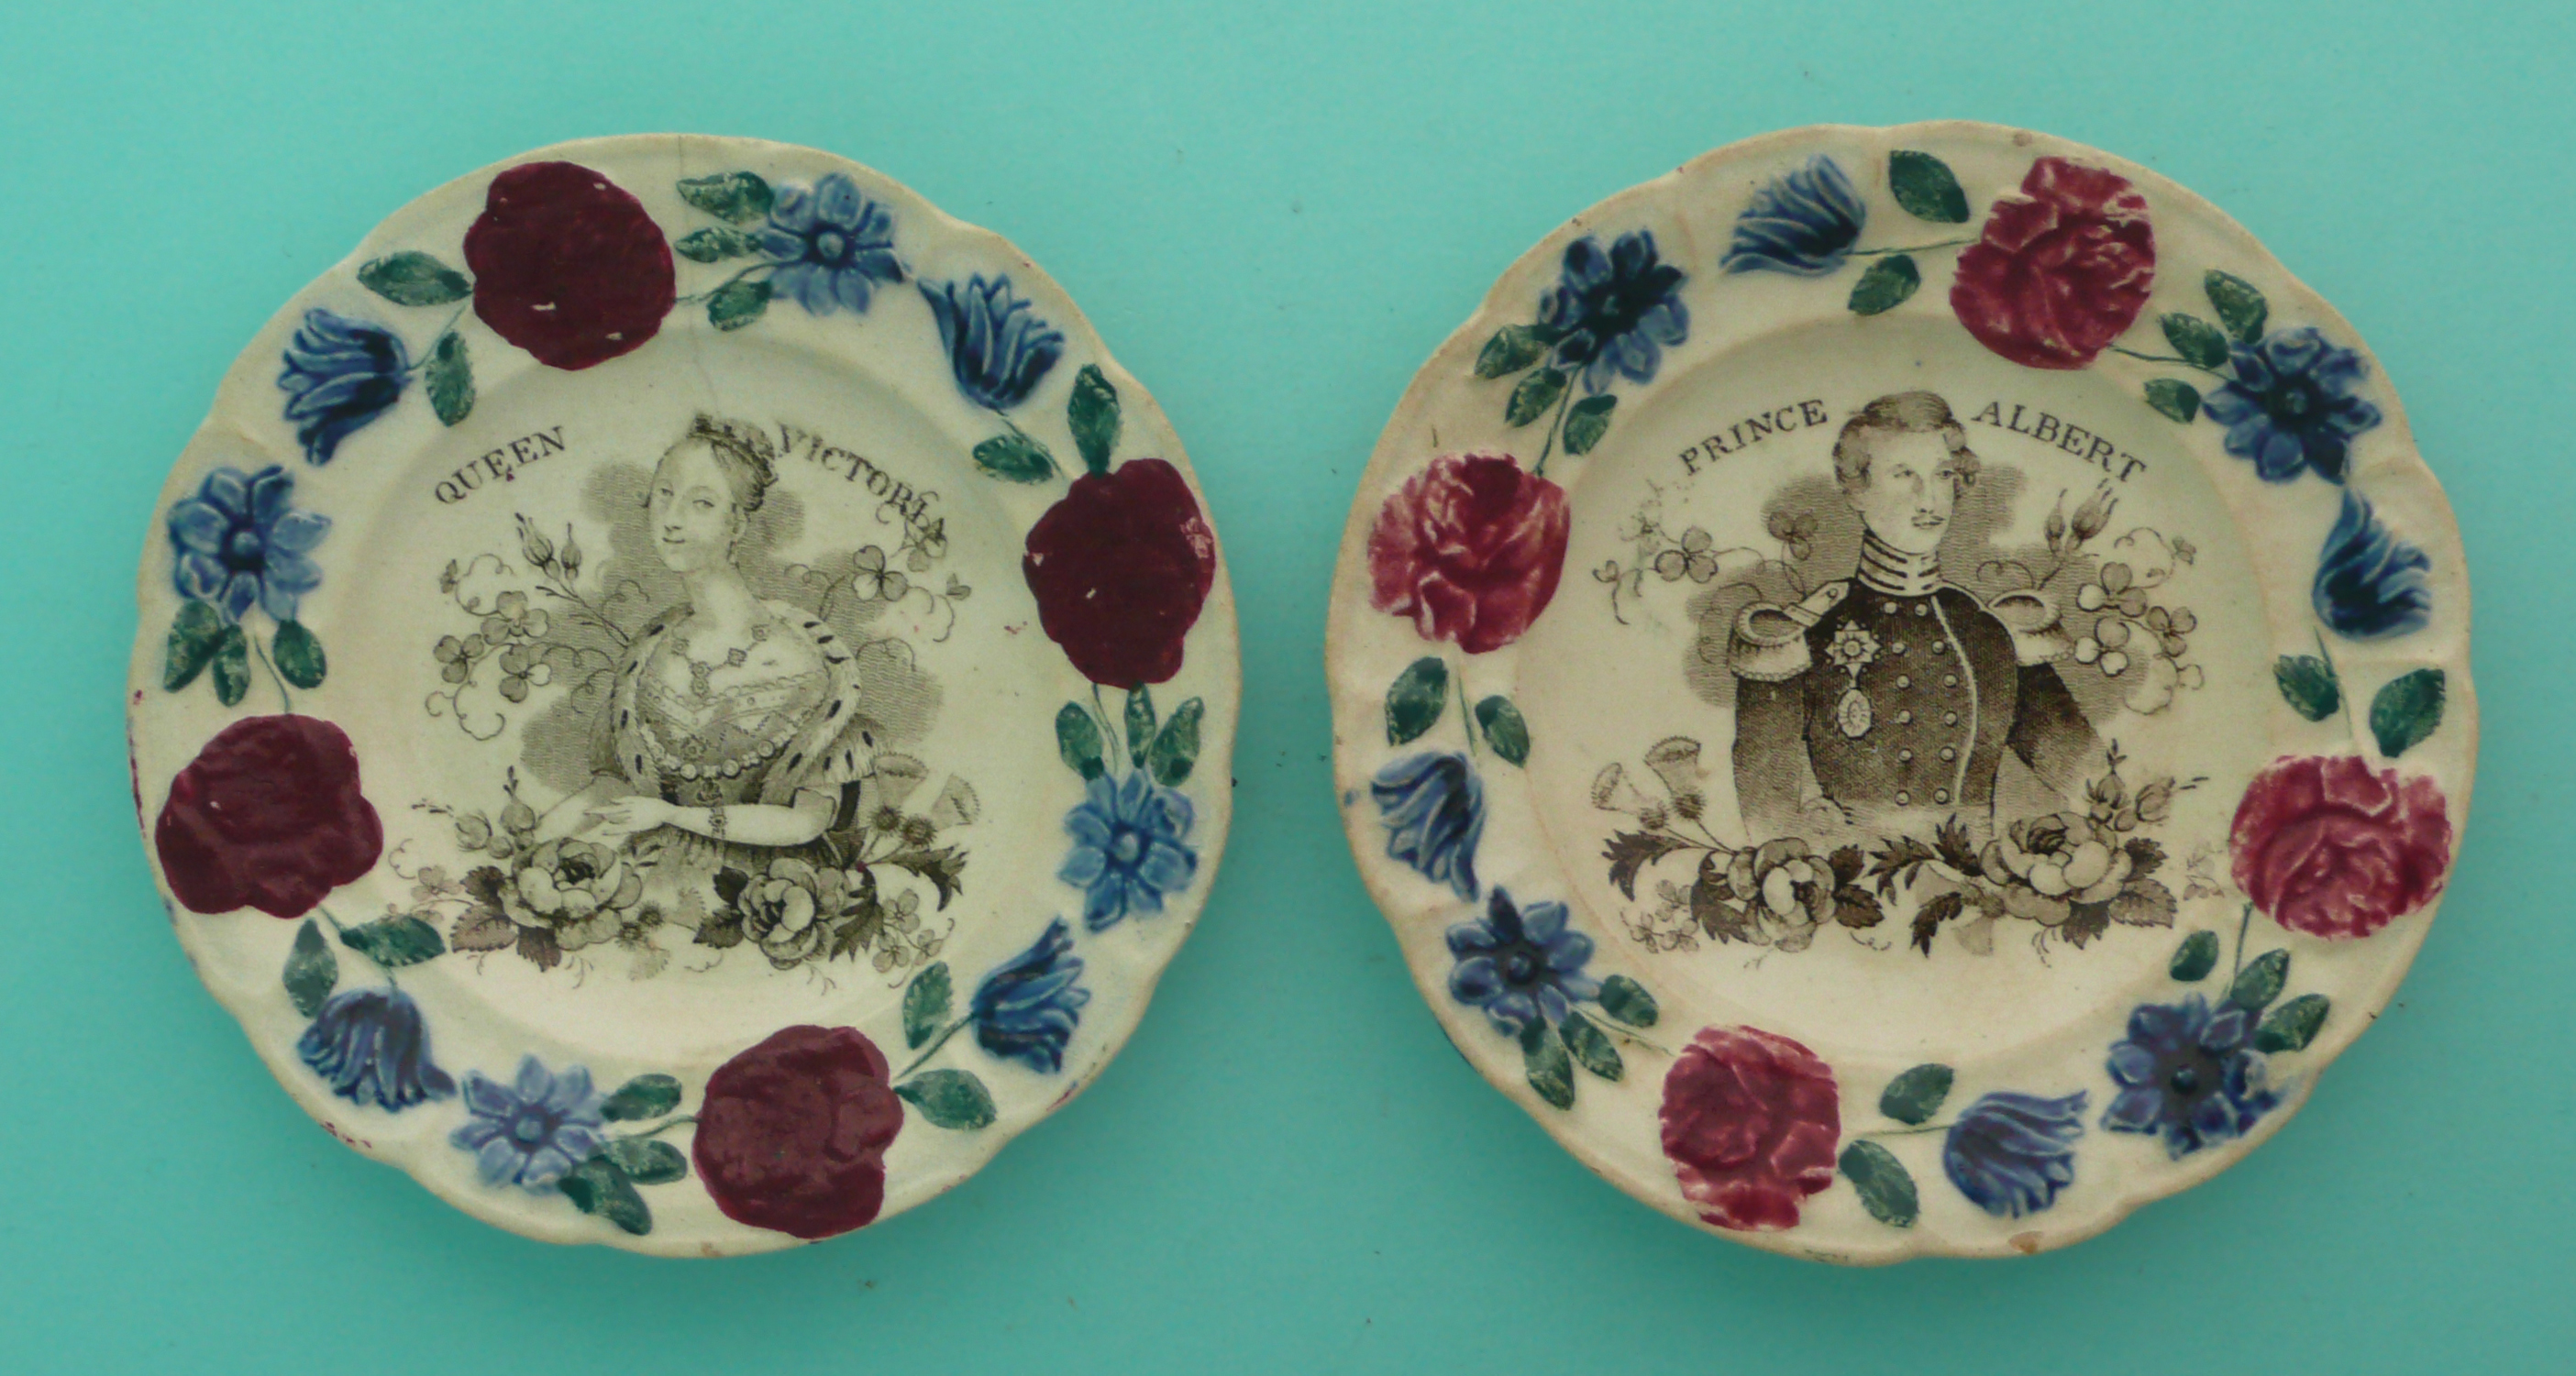 1840 Wedding: a rare pair of nursery plates with colourful floral and foliate moulded borders,